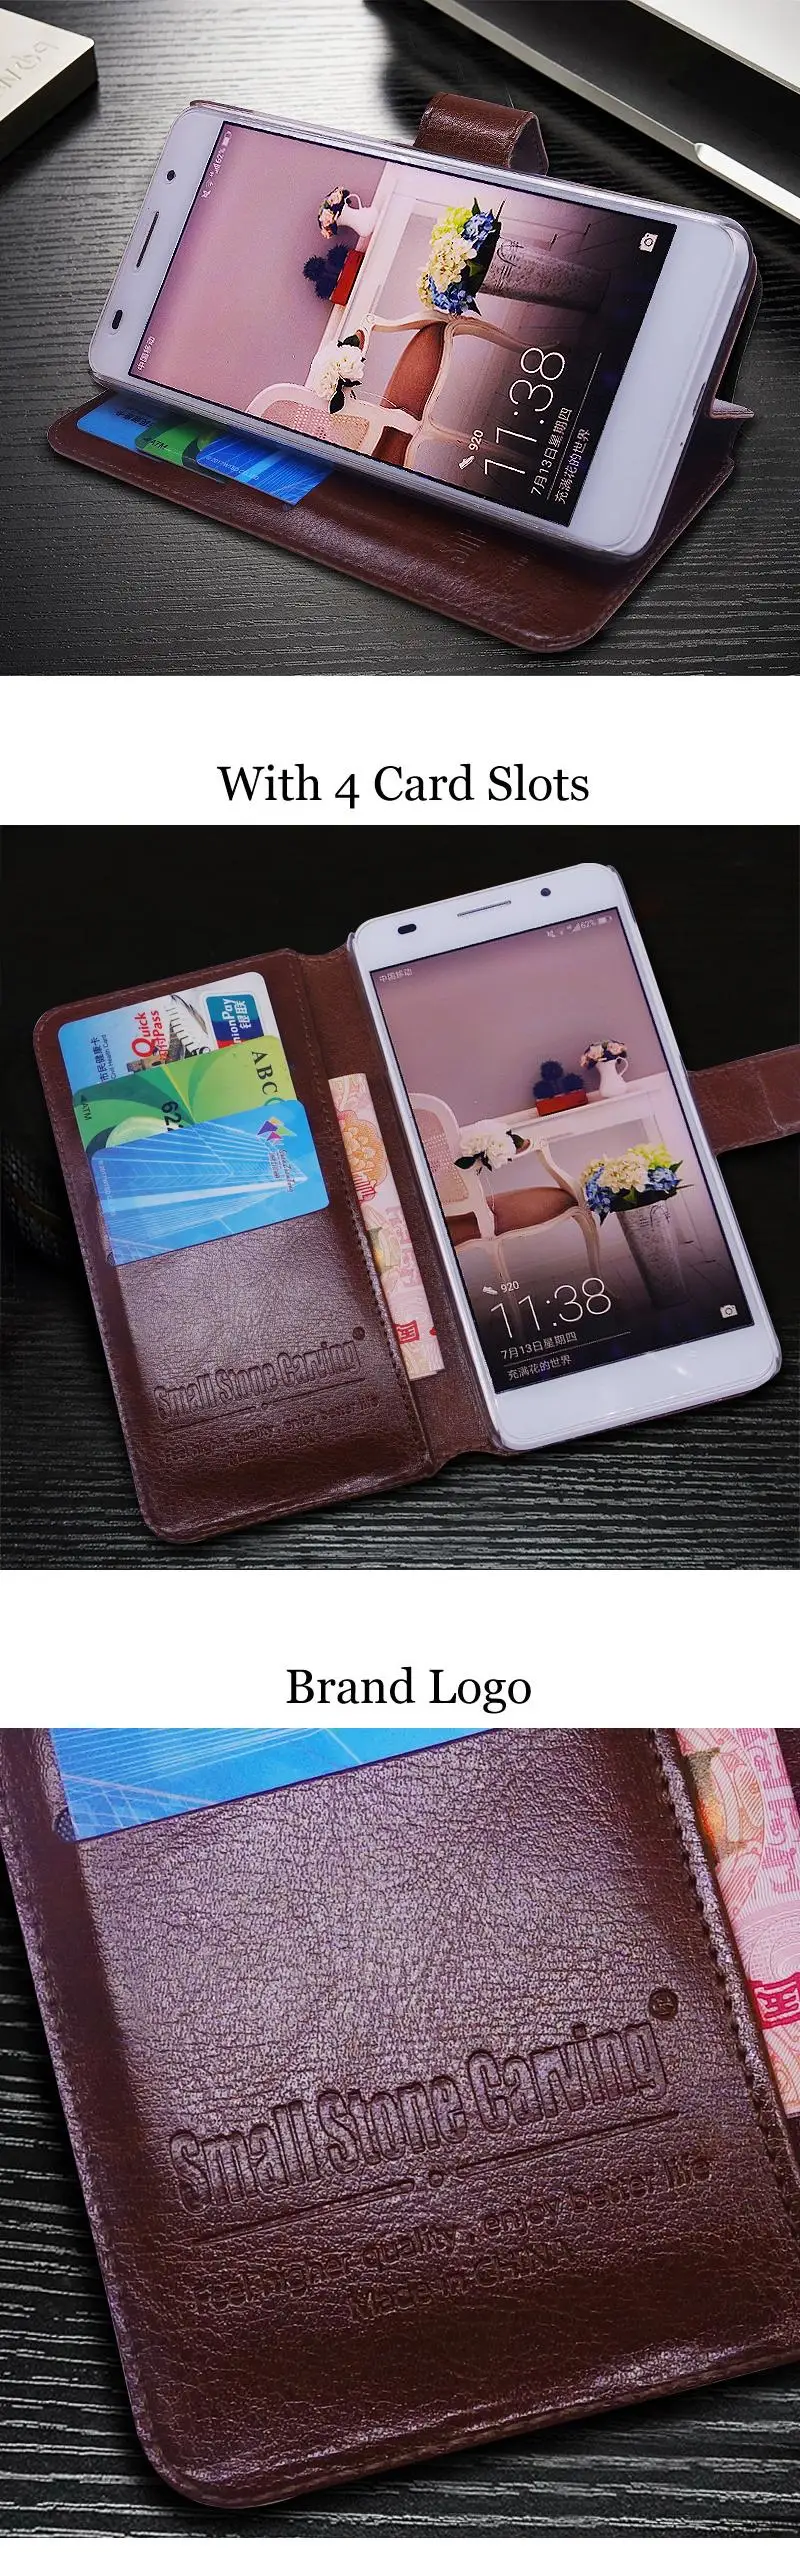 Magnetic PU Leather Stand Flip 5.0 For Huawei Honor 3C Lite Case For Huawei Honor 3C Lite Hol-U19 Cell Phone Cover Case